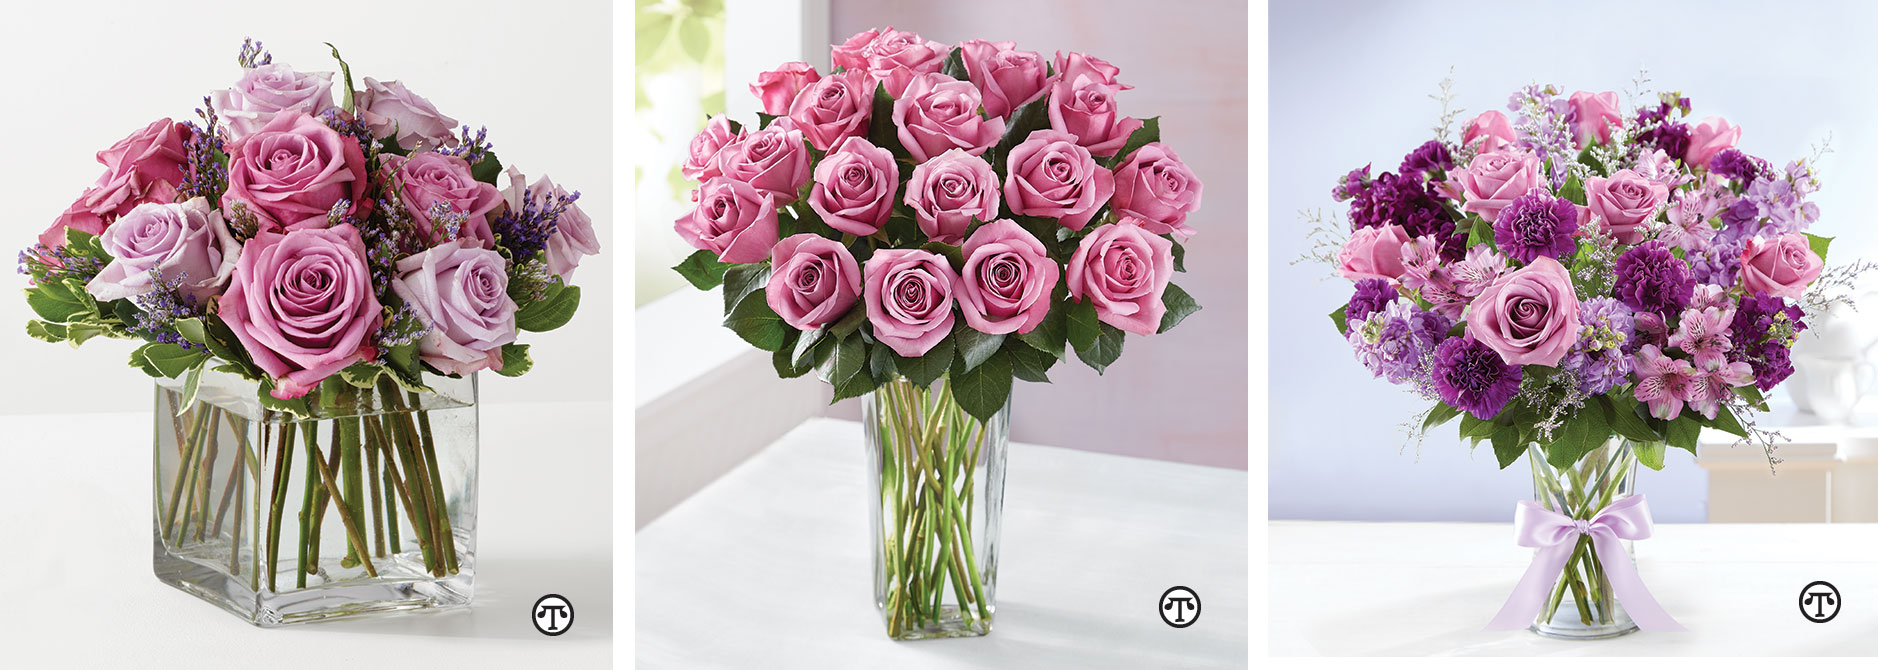 Lavender and purple roses in a chic clear vase make the Graceful Lavender Bouquet a beautiful gift at any time. Give your family and friends the royal treatment with a Passion for Purple Roses bouquet. This Shades of Purple bouquet can brighten just about anyone’s day. 